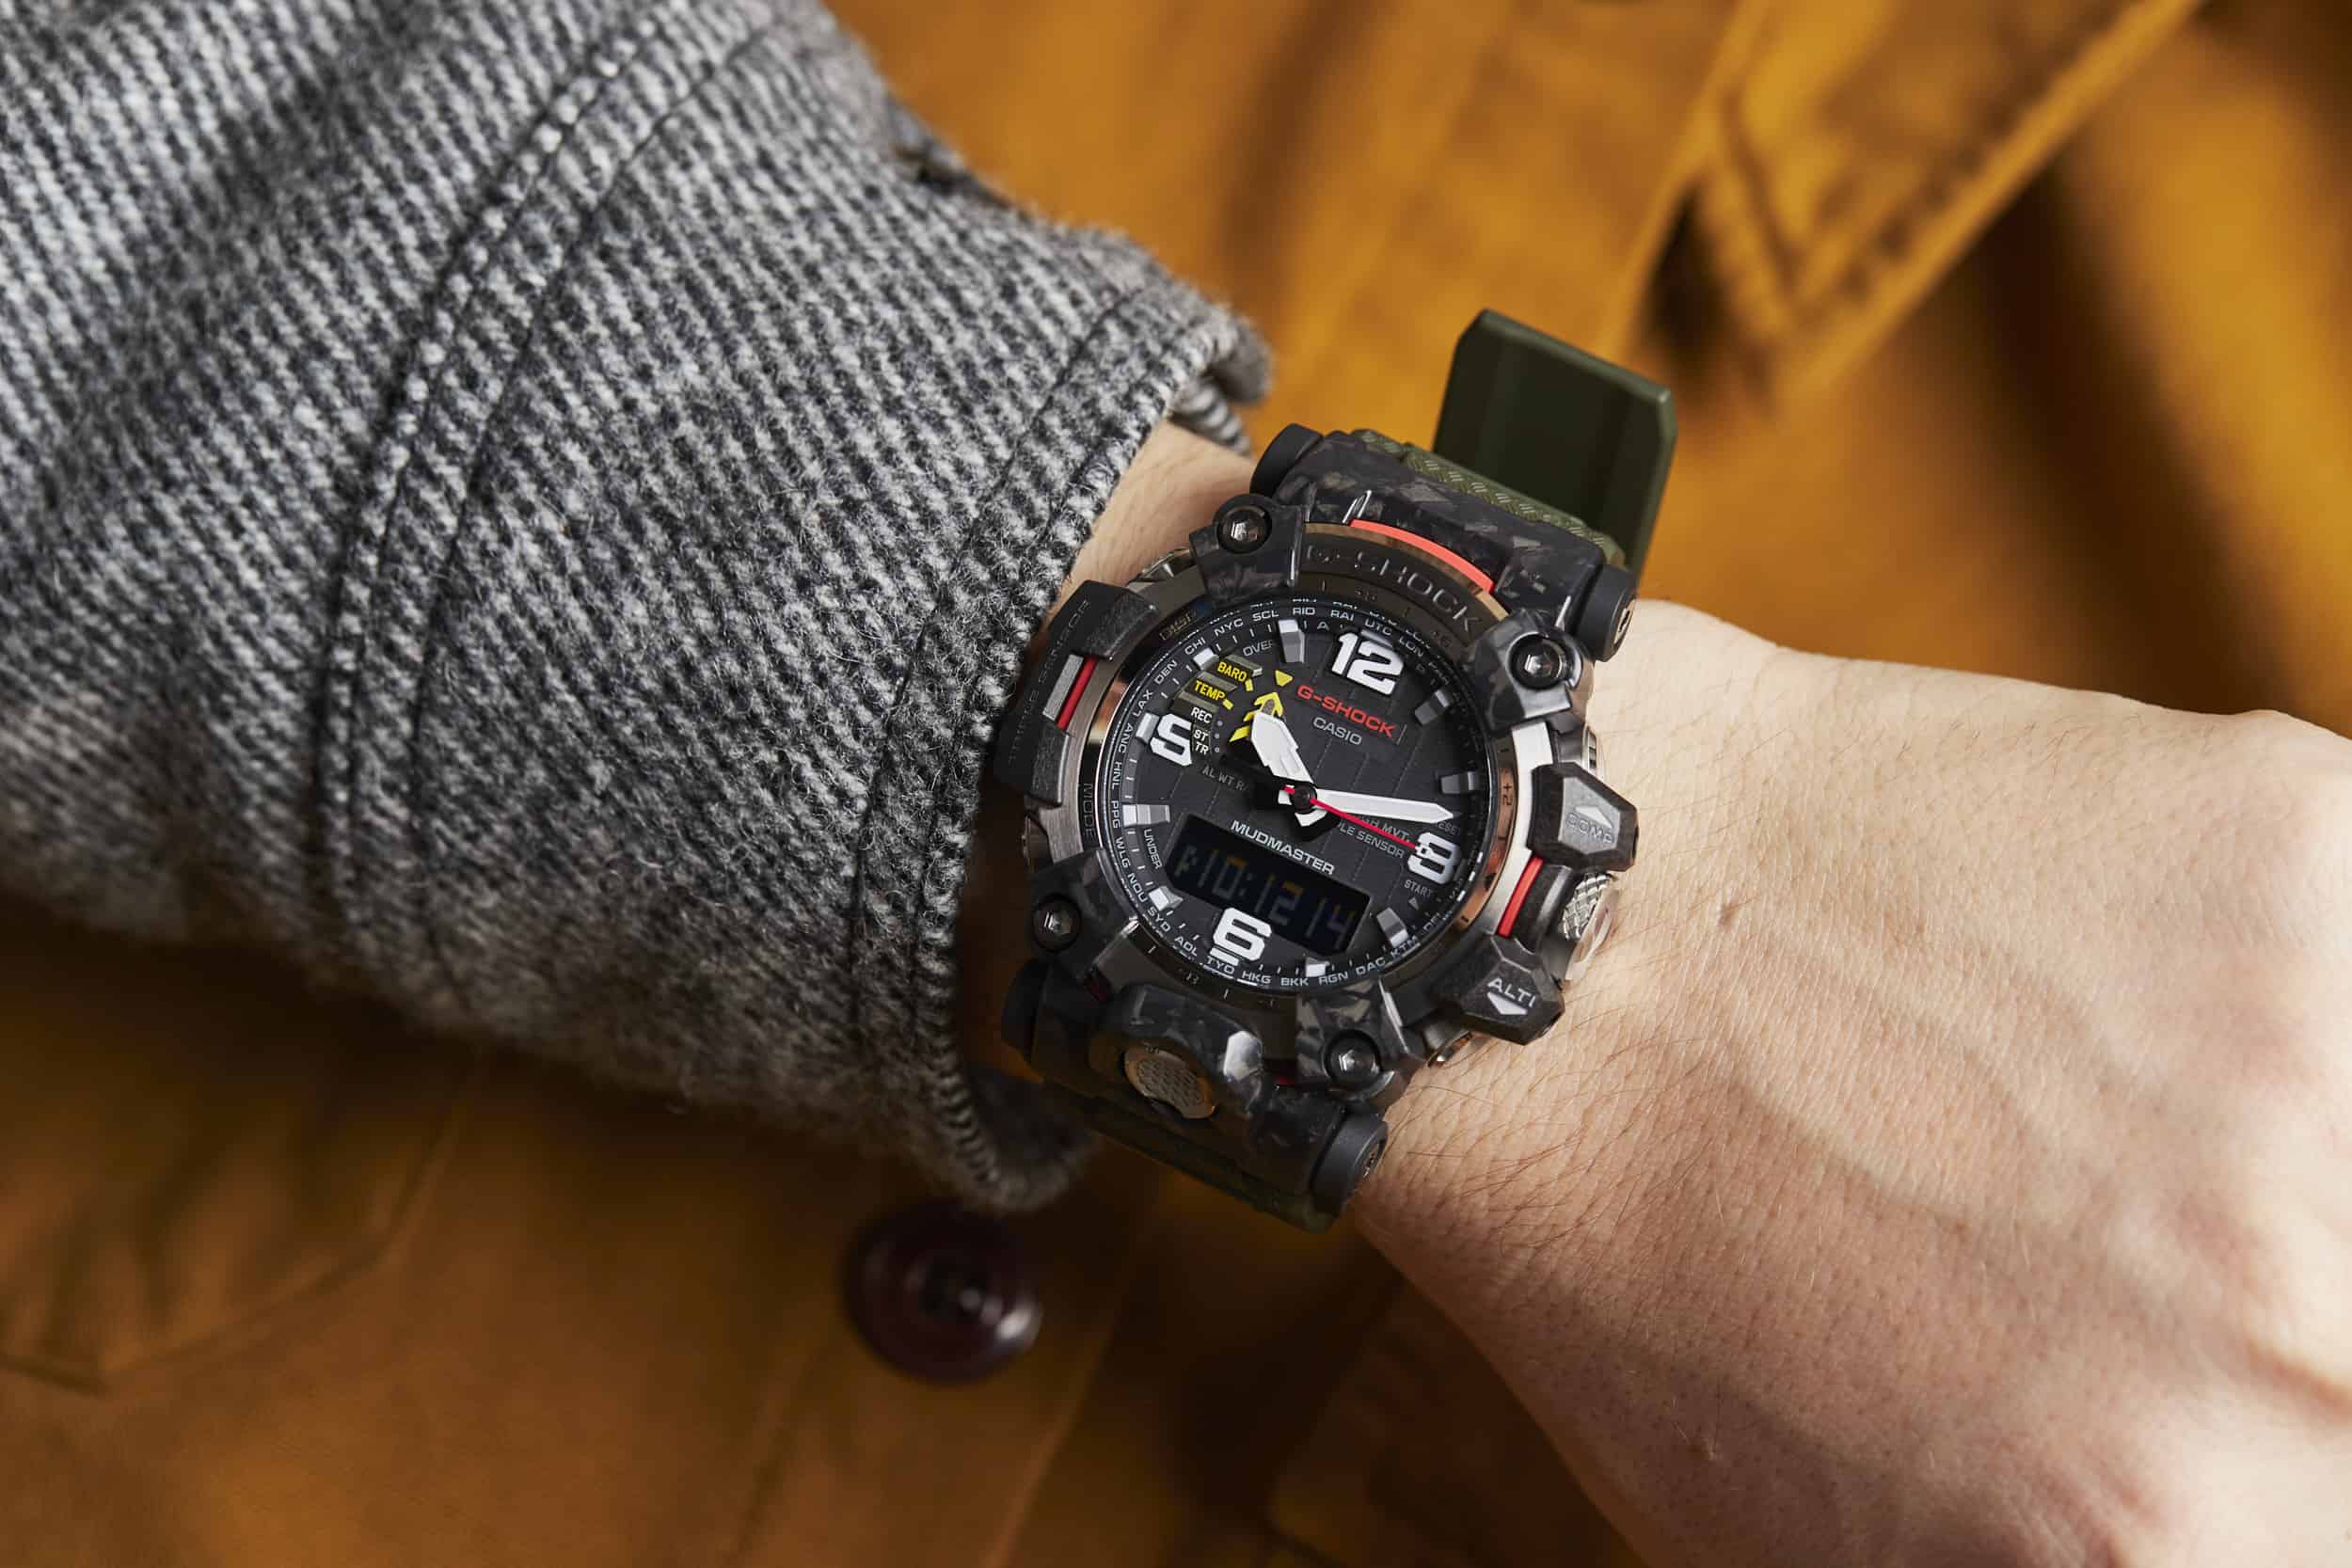 The Roundup: Overbuilt Tool Watches, Versatile Gear, and Good Old US-Made Straps